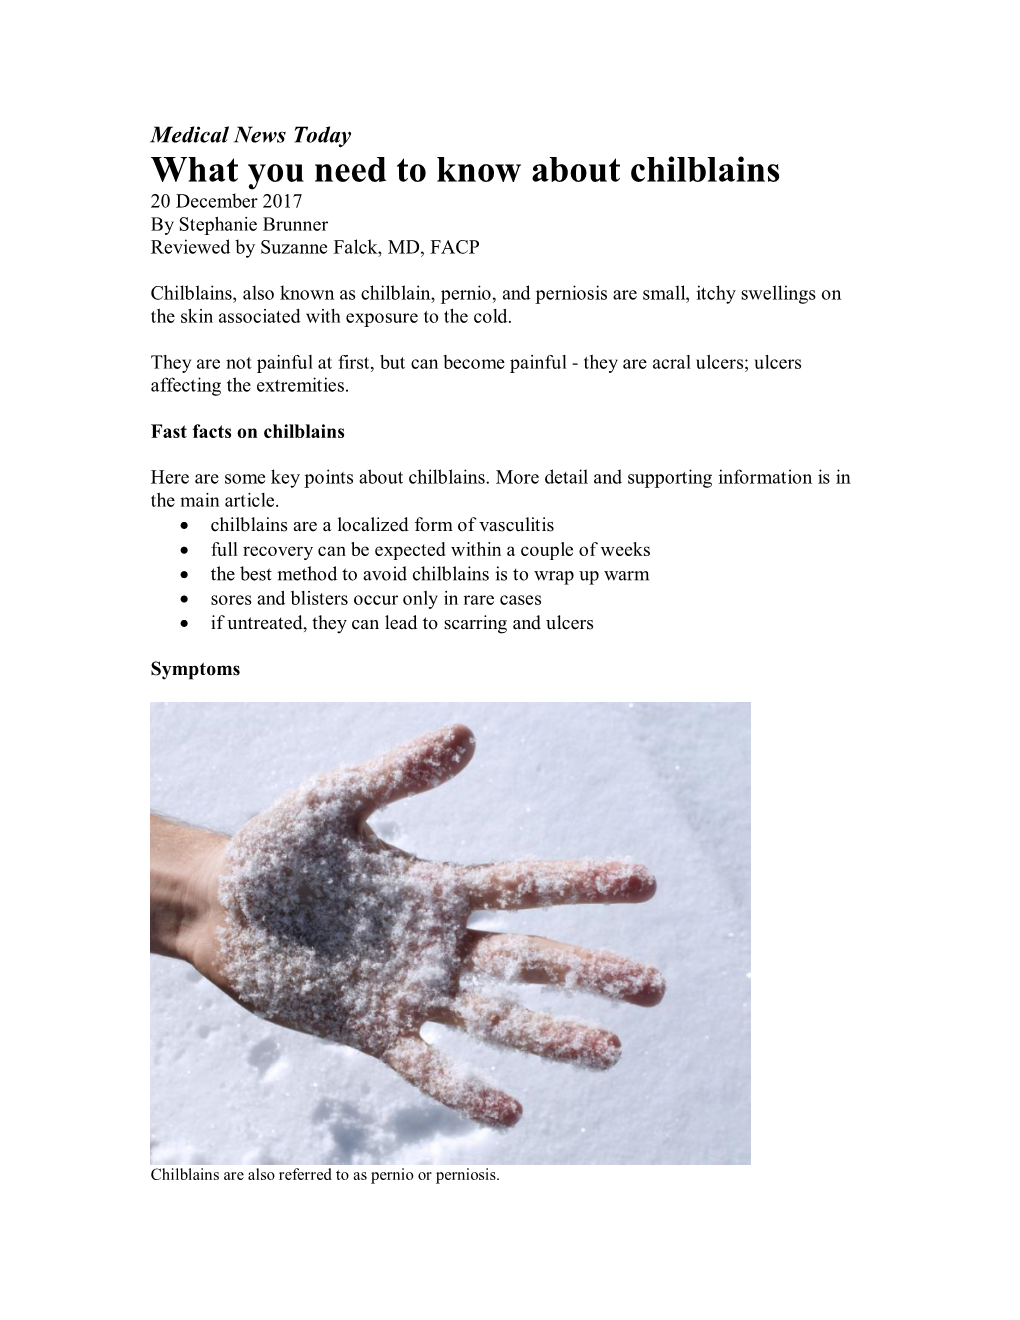 What You Need to Know About Chilblains 20 December 2017 by Stephanie Brunner Reviewed by Suzanne Falck, MD, FACP